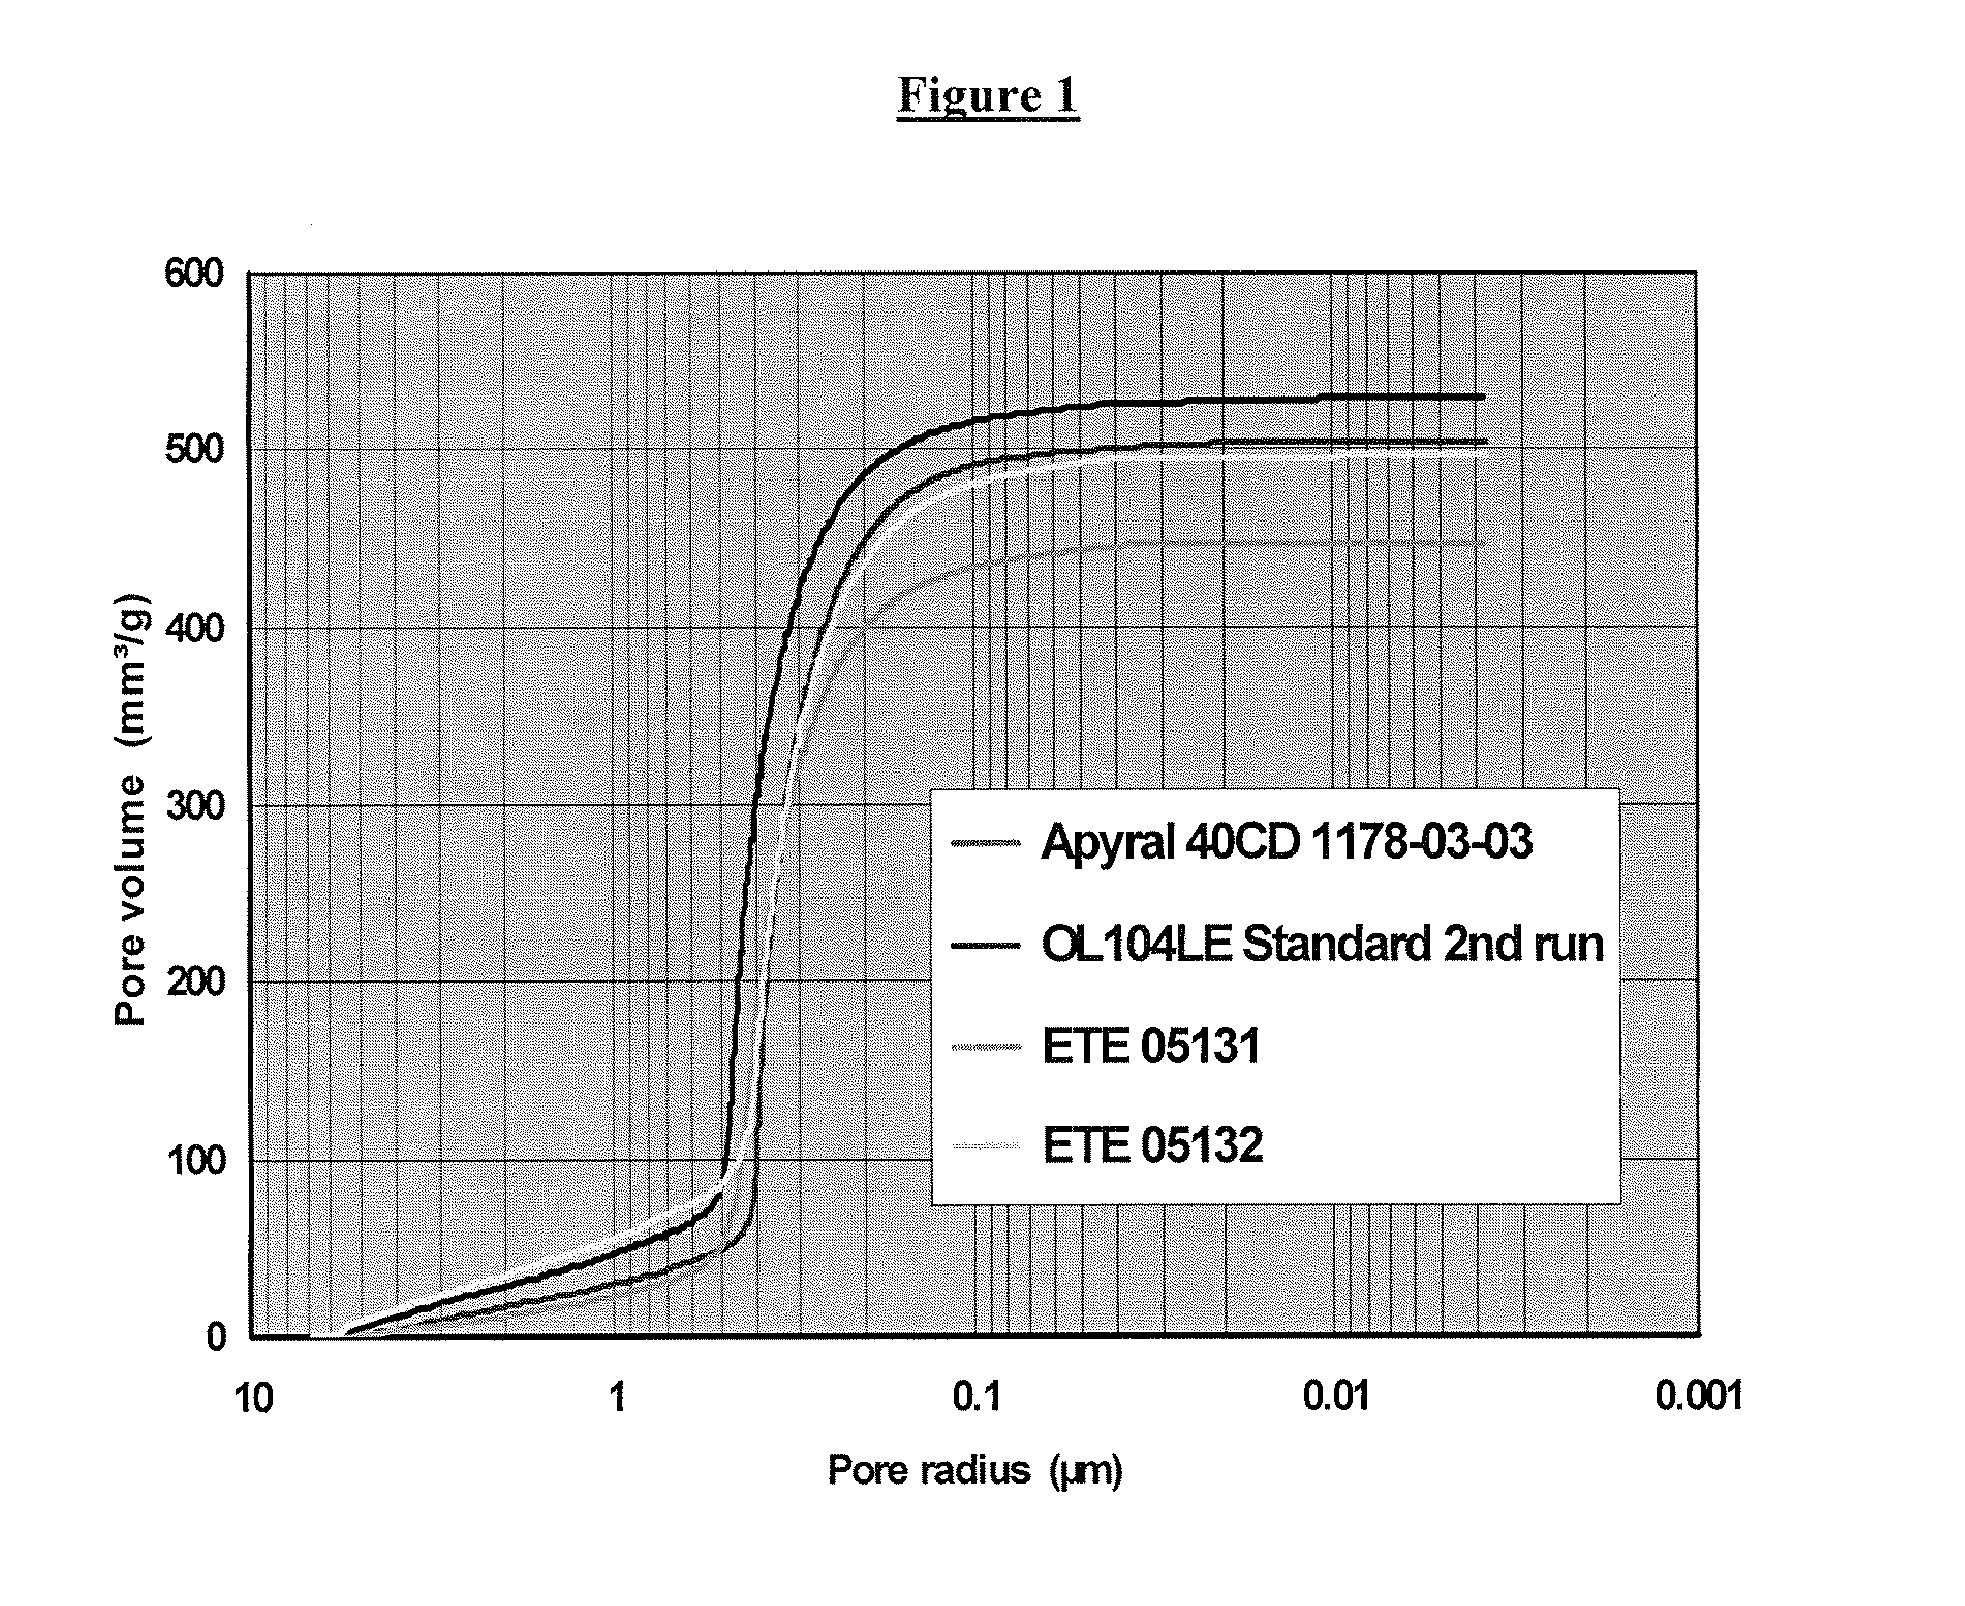 Aluminum hydroxide particles produced from an organic acid containing aluminum hydroxide slurry